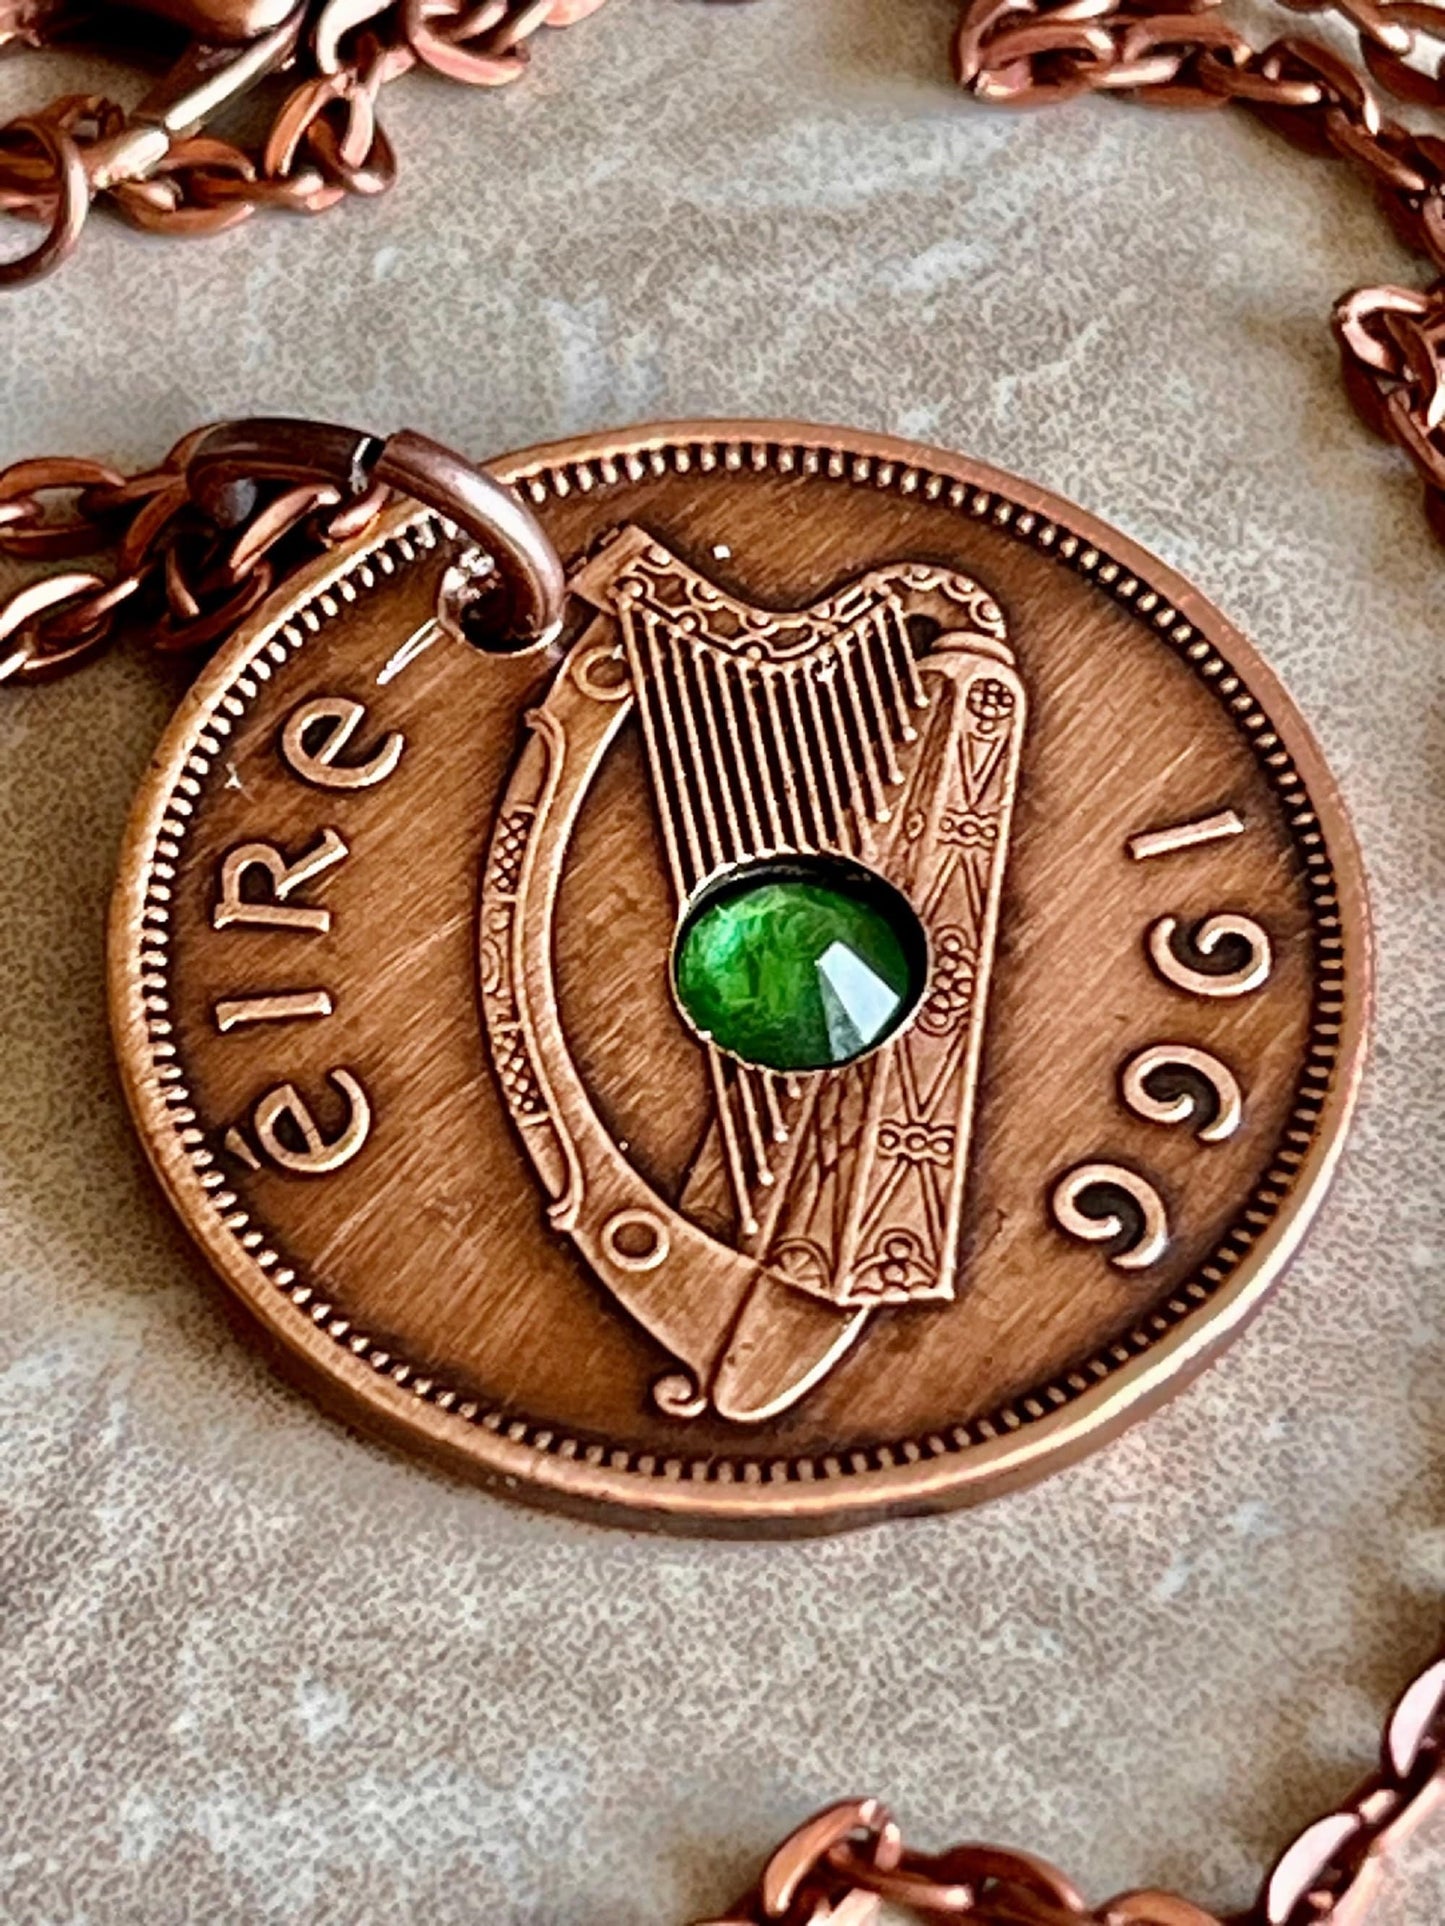 Ireland Coin Pendant 1/2 Pingin Irish Piglet Harp Necklace Rhinestone Gift For Friend Charm Gift For Him, Her, Coin Collector, World Coins